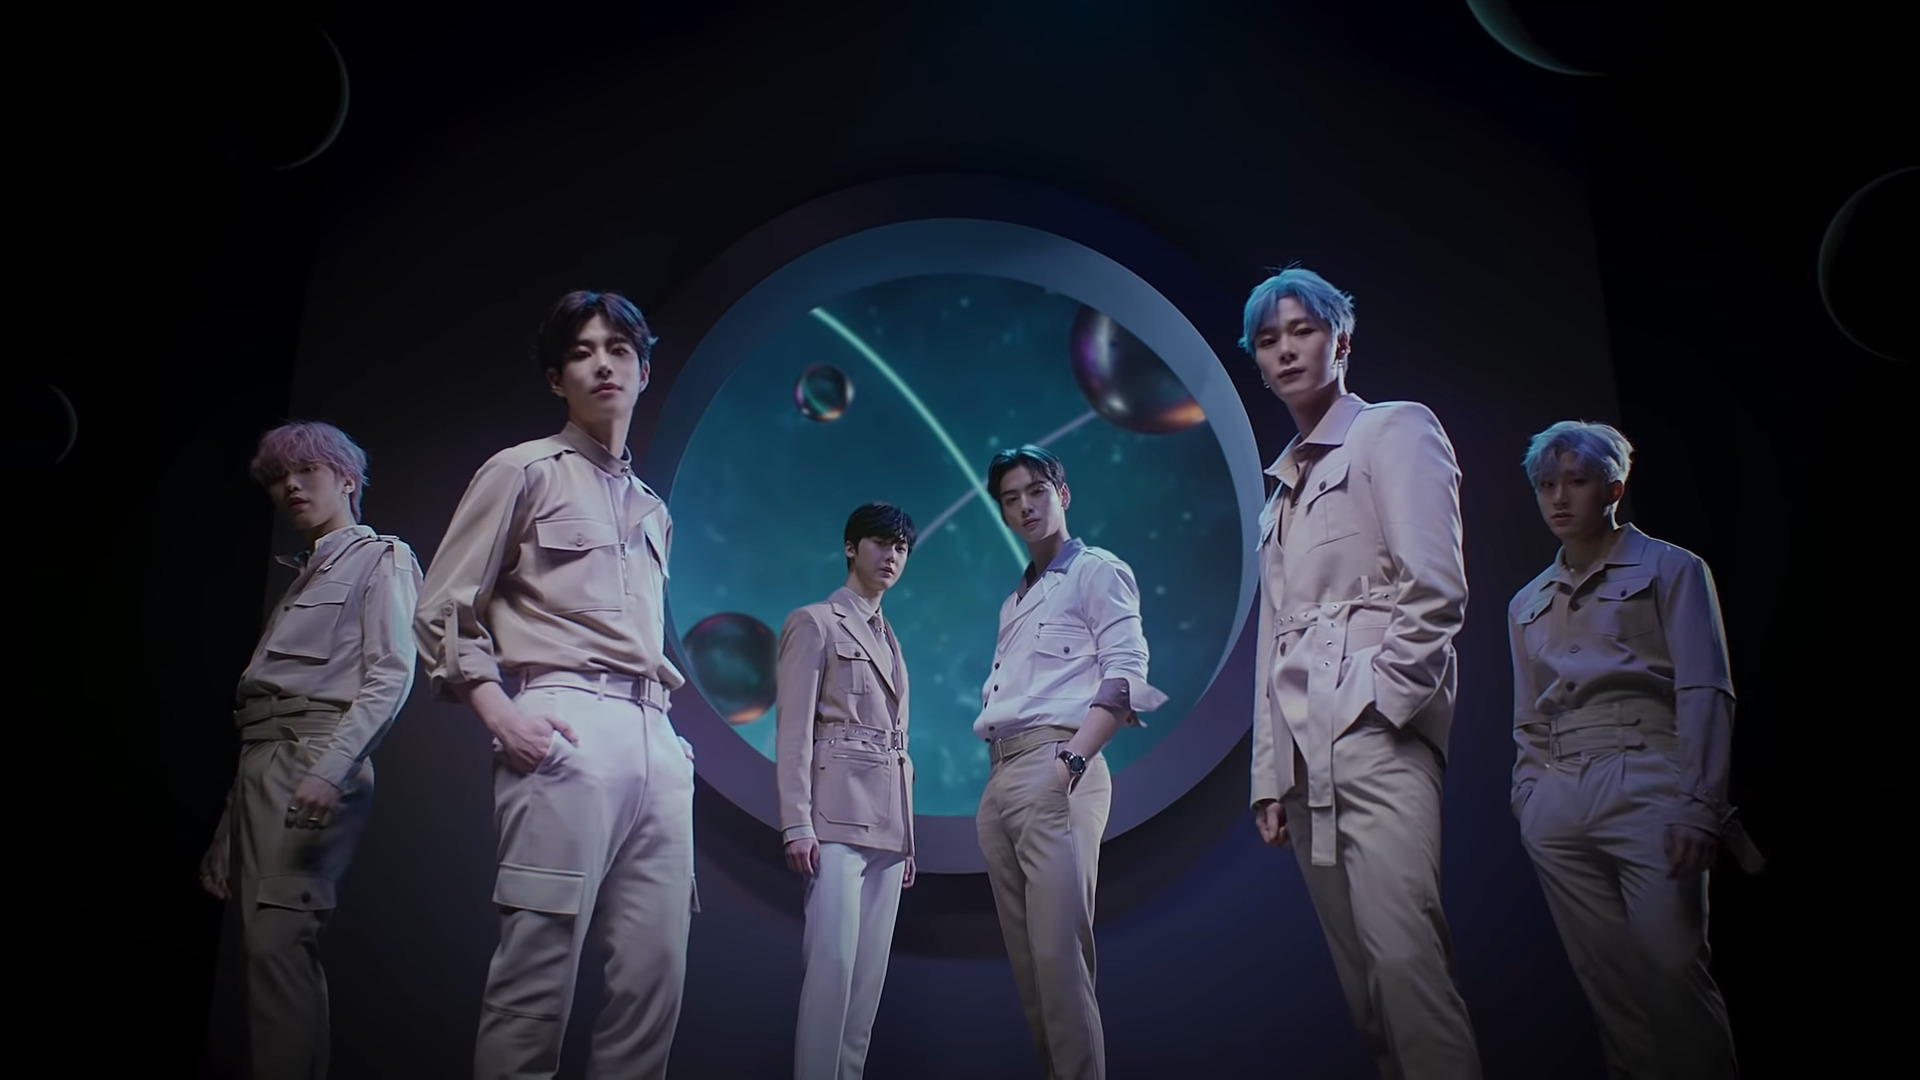 Astro's "Knock" is an Elegant, Stirring Portrayal of ...